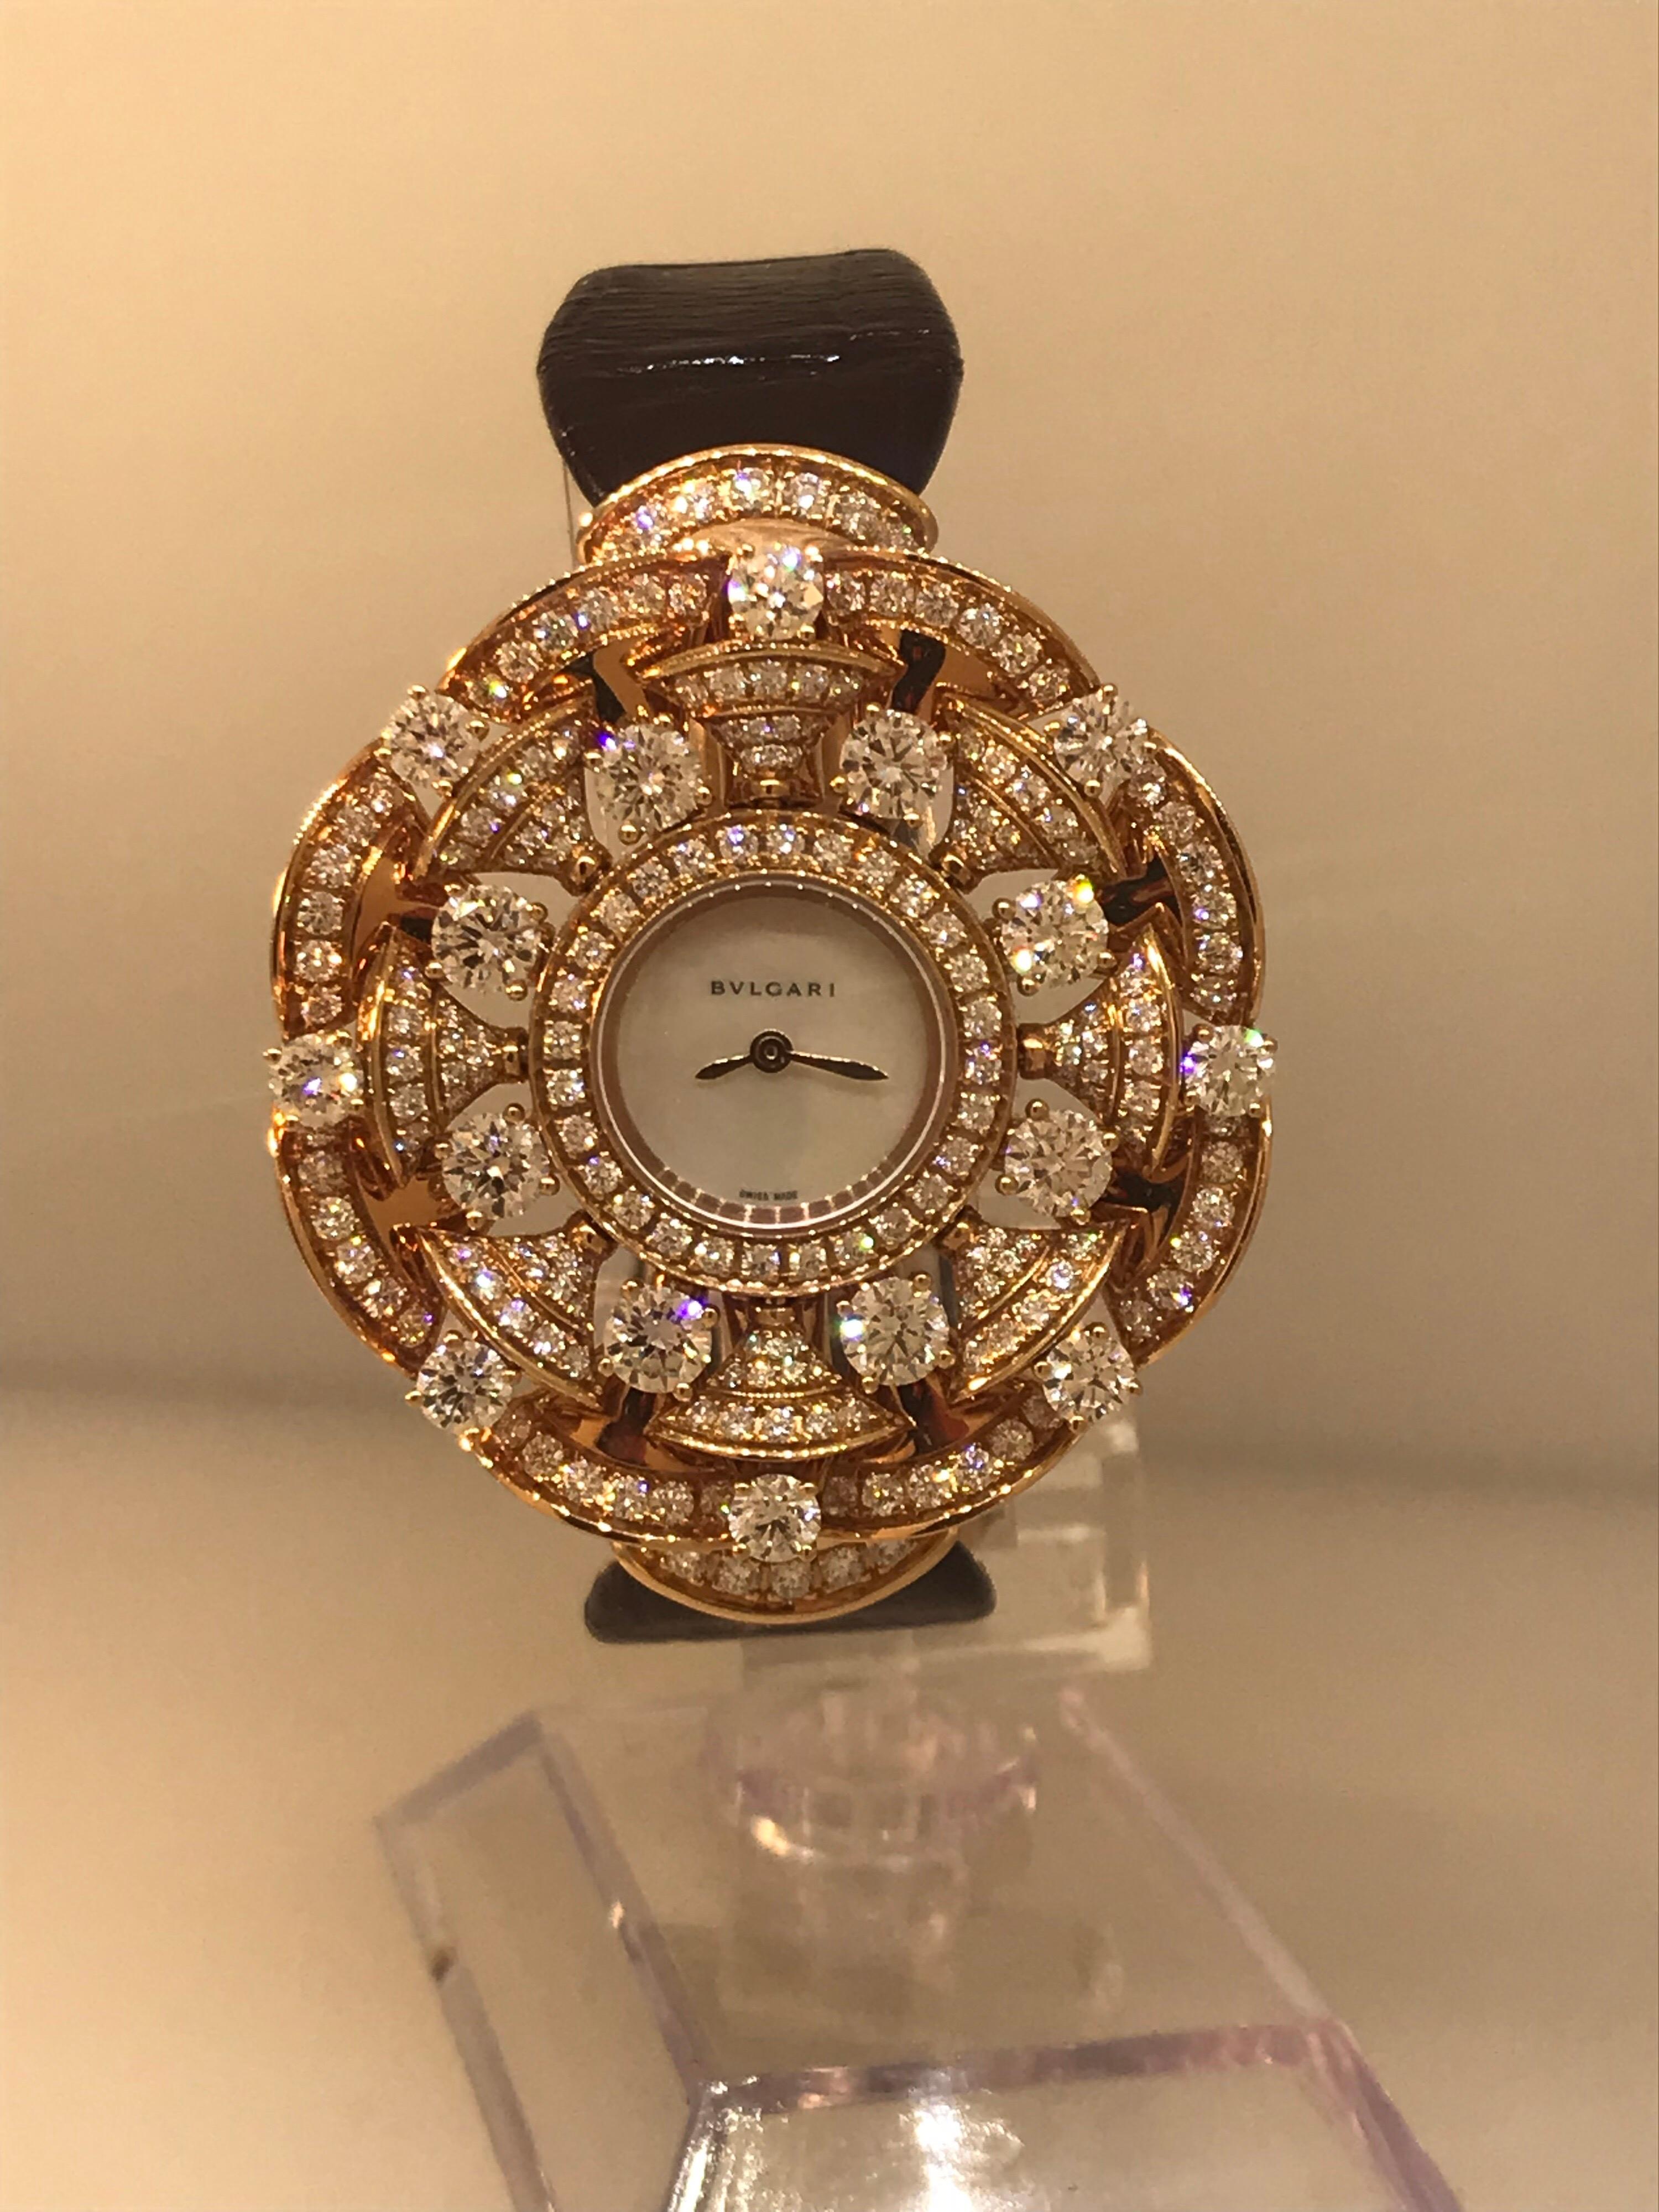 Bulgari Diva's Dream Ladies Watch

Model Number: 102546

100% Authentic

Brand New

Comes with original Bulgari box and papers

18 Karat Rose Gold Case & Buckle

Diamond Case

White Mother of Pearl Dial  

Case Diameter: 39mm

Retails for $62,000